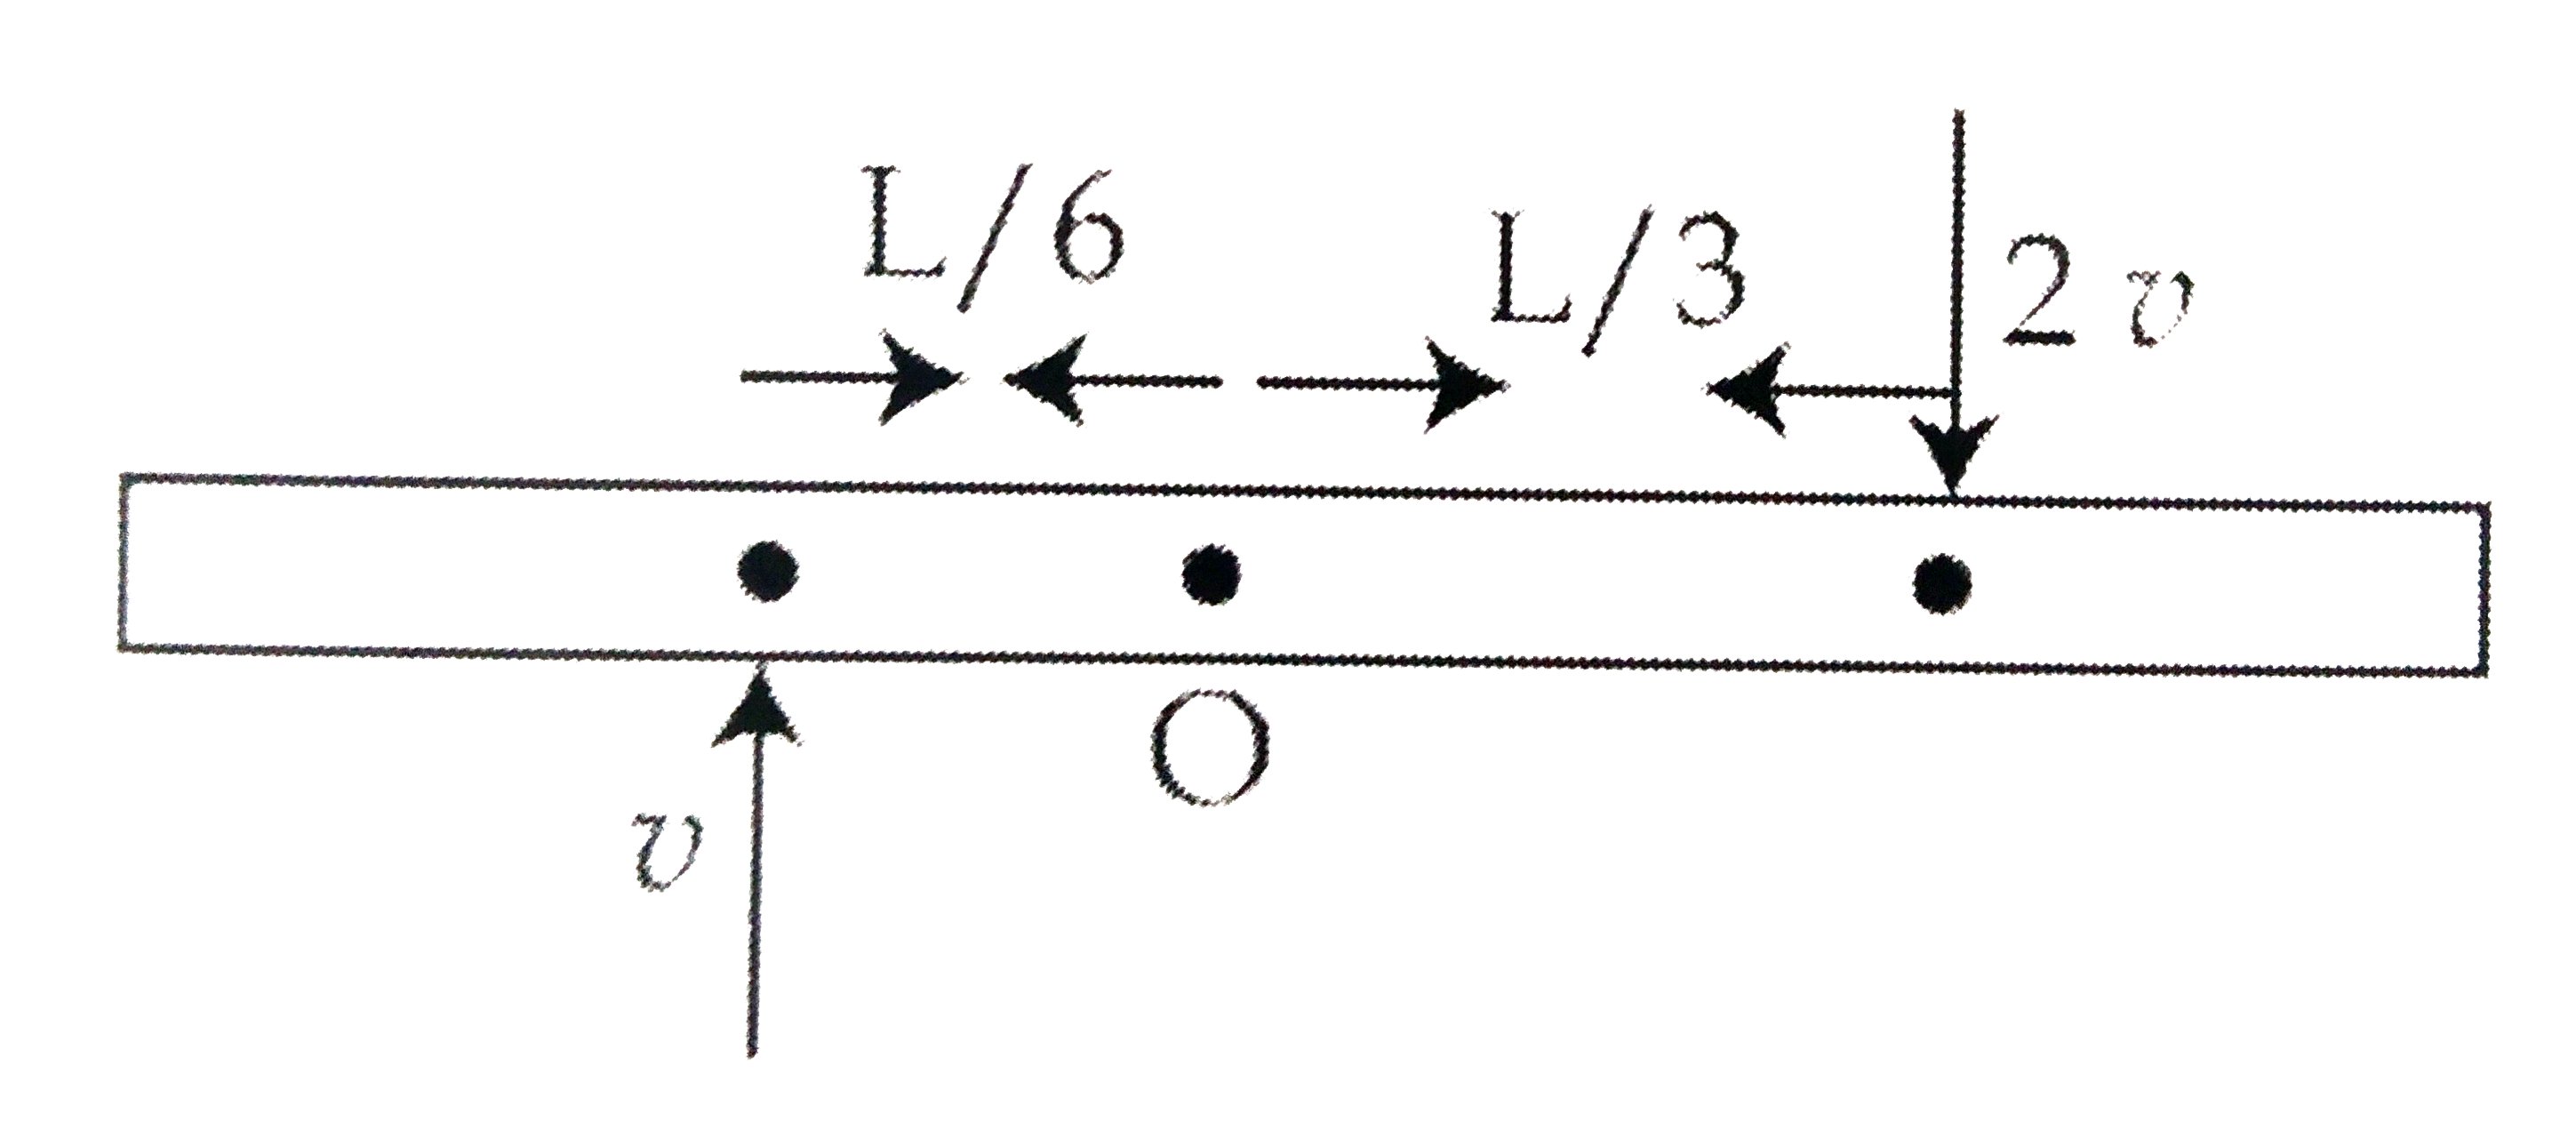 A thin uniform bar of length L and mass 8m lies on a smooth horizontal table .Two point masses m and 2 m are moving in the same horizontal plane from opposite sides of the bar with speeds 2v and v respectively .The masses stick to the bar after collision at a distances (L)/(3) and (L)/(6) respectively  from the center of the bar if the bar starts rotating about its center of mass as result of collision the angular speed of the bar will be